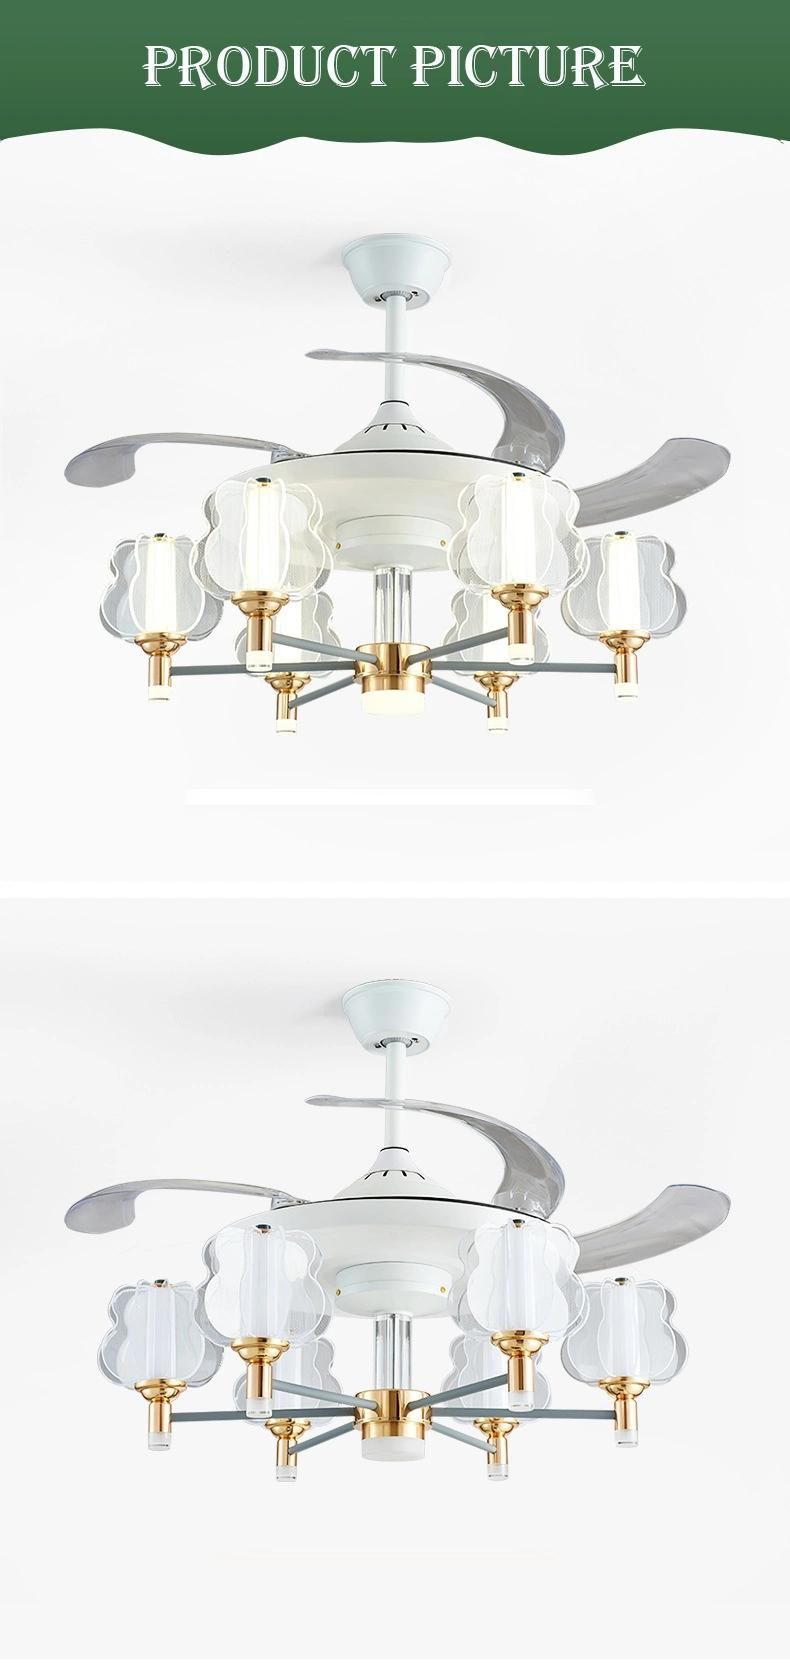 Decorative Lighting Energy Saving Hidden Invisible Folding Blade Modern Ceiling Fan with LED Light